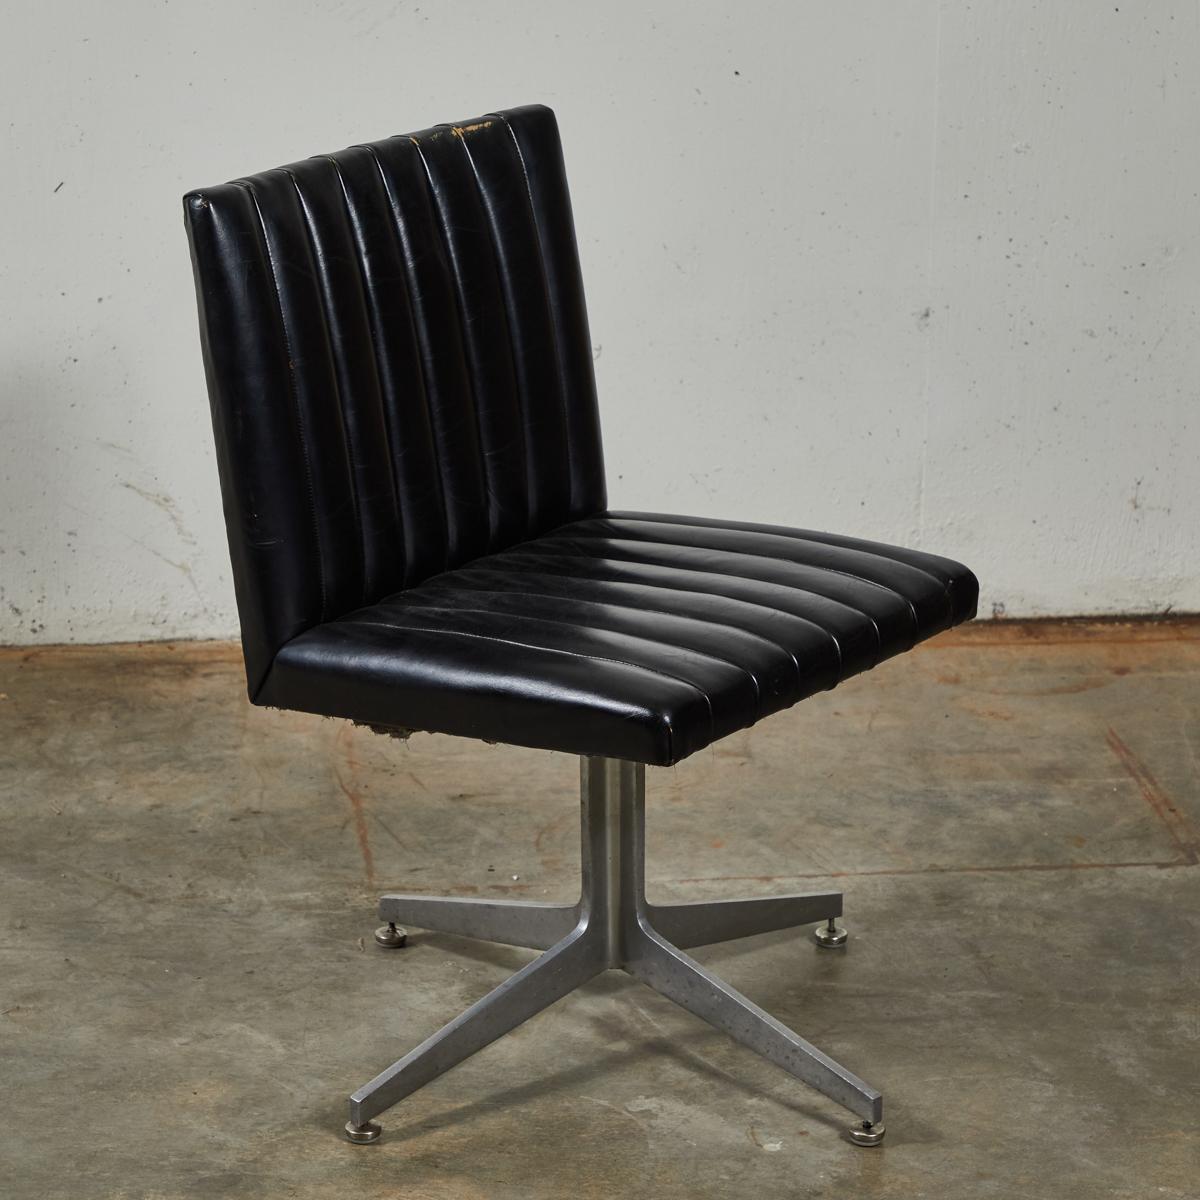 Metal Mid-Century Modern Set of Four Swivel Chairs by Eames for Herman Miller